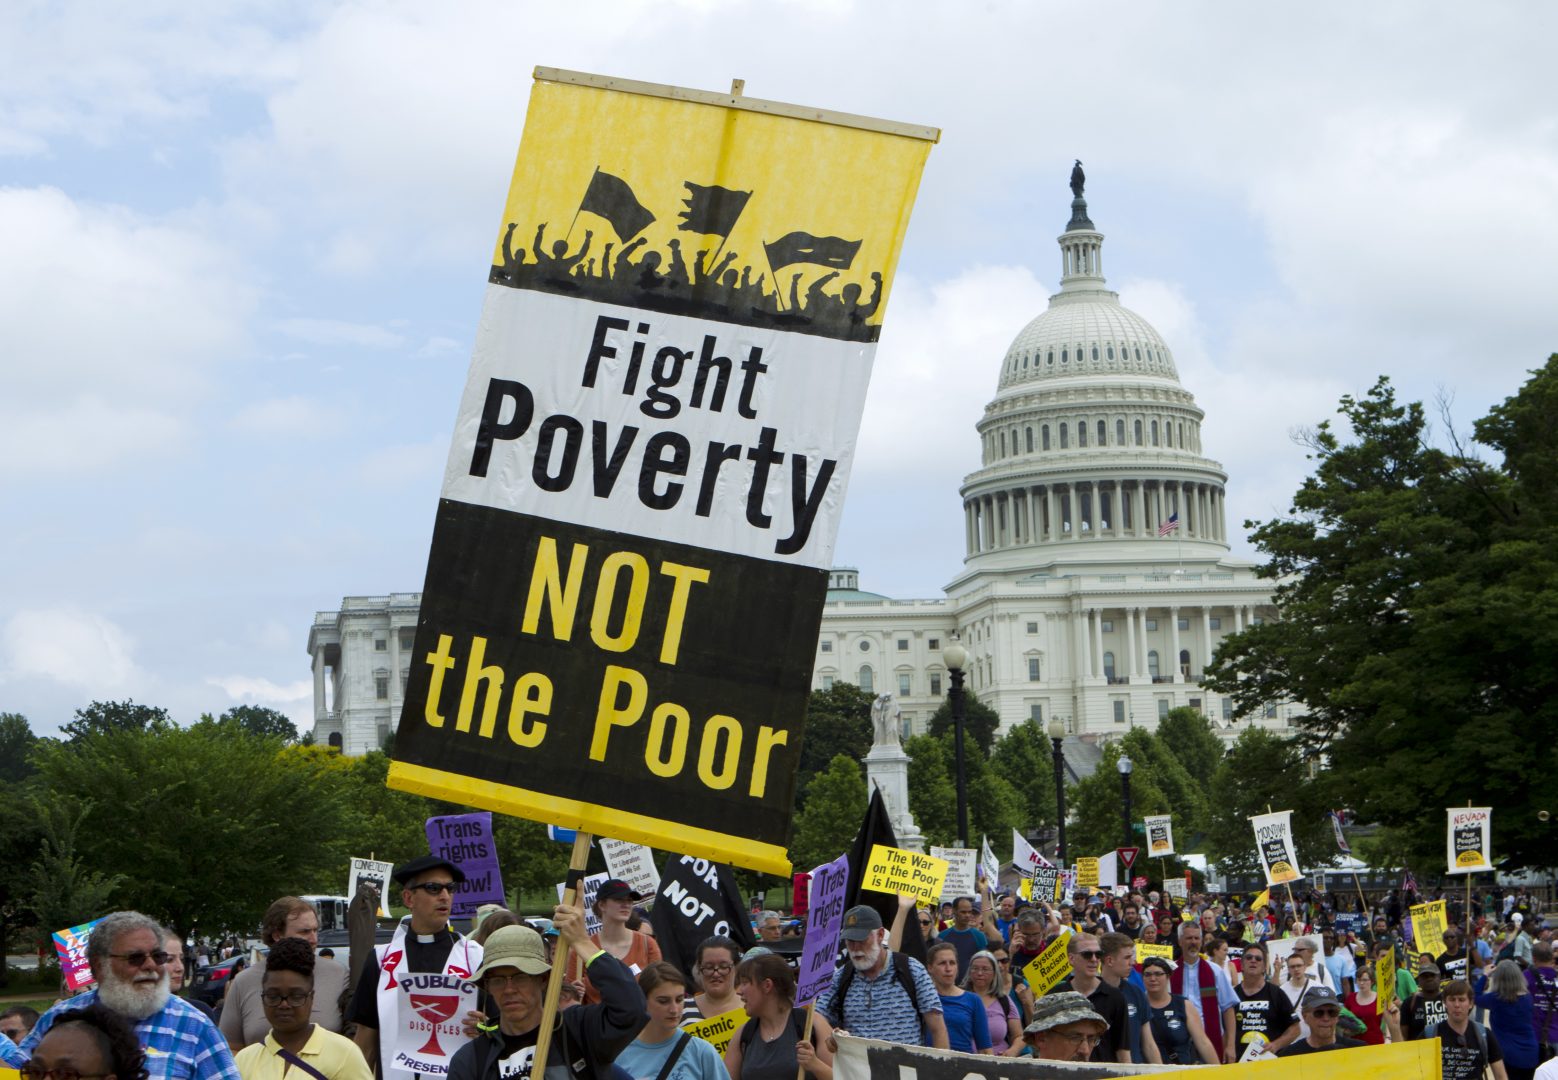 Demonstrators march outside the U.S. Capitol during the Poor People's Campaign rally at the National Mall in Washington on Saturday, June 23, 2018.